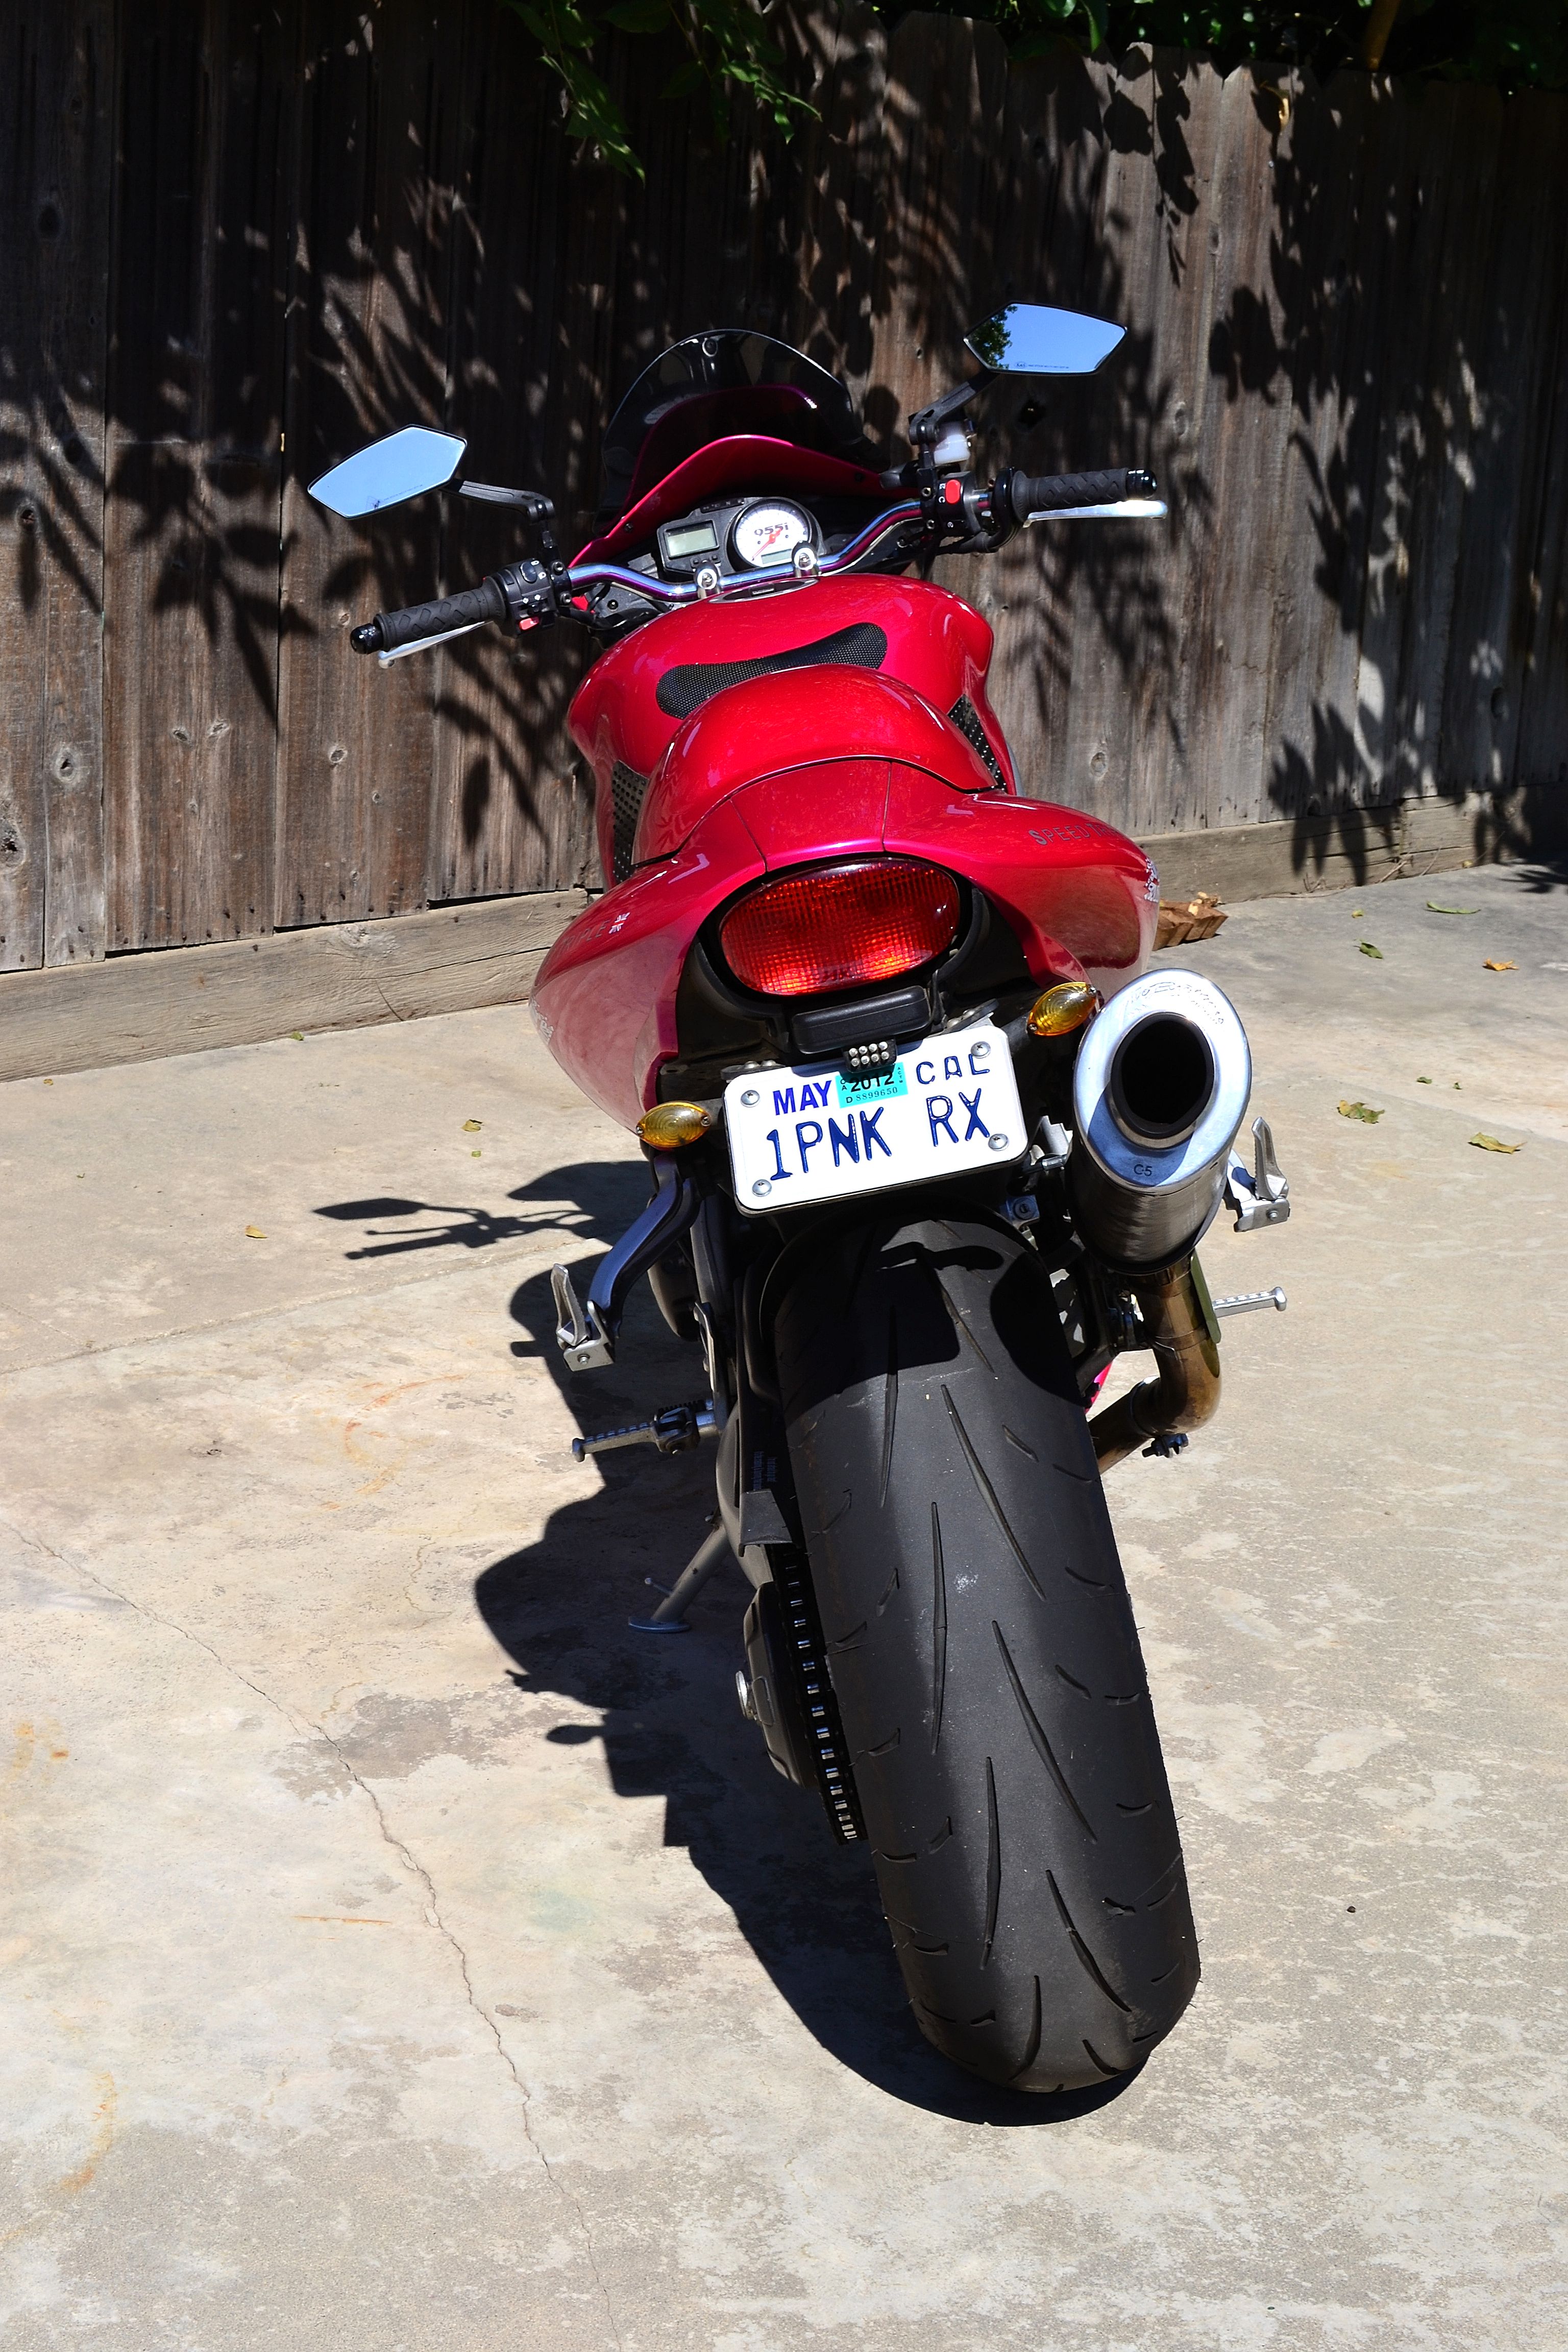 The new personalized license plate for my Triumph Speed Triple!!!